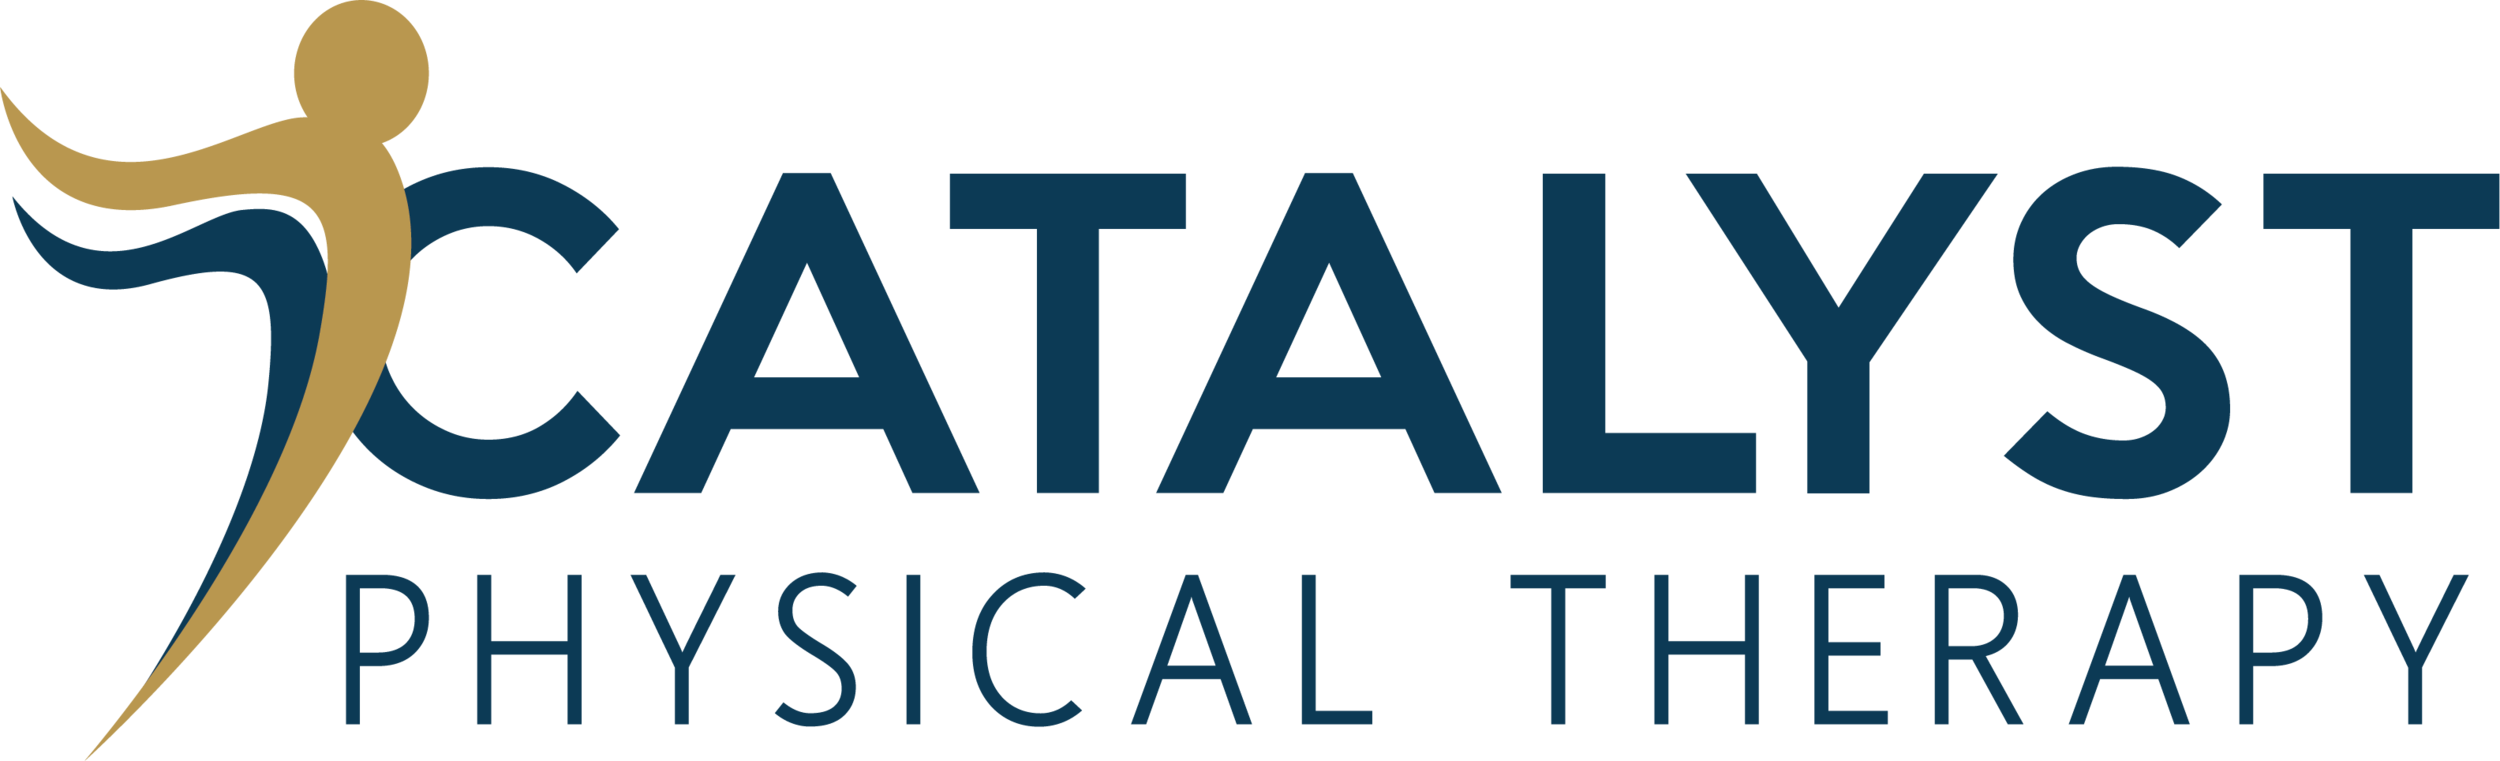 Catalyst Physical Therapy 